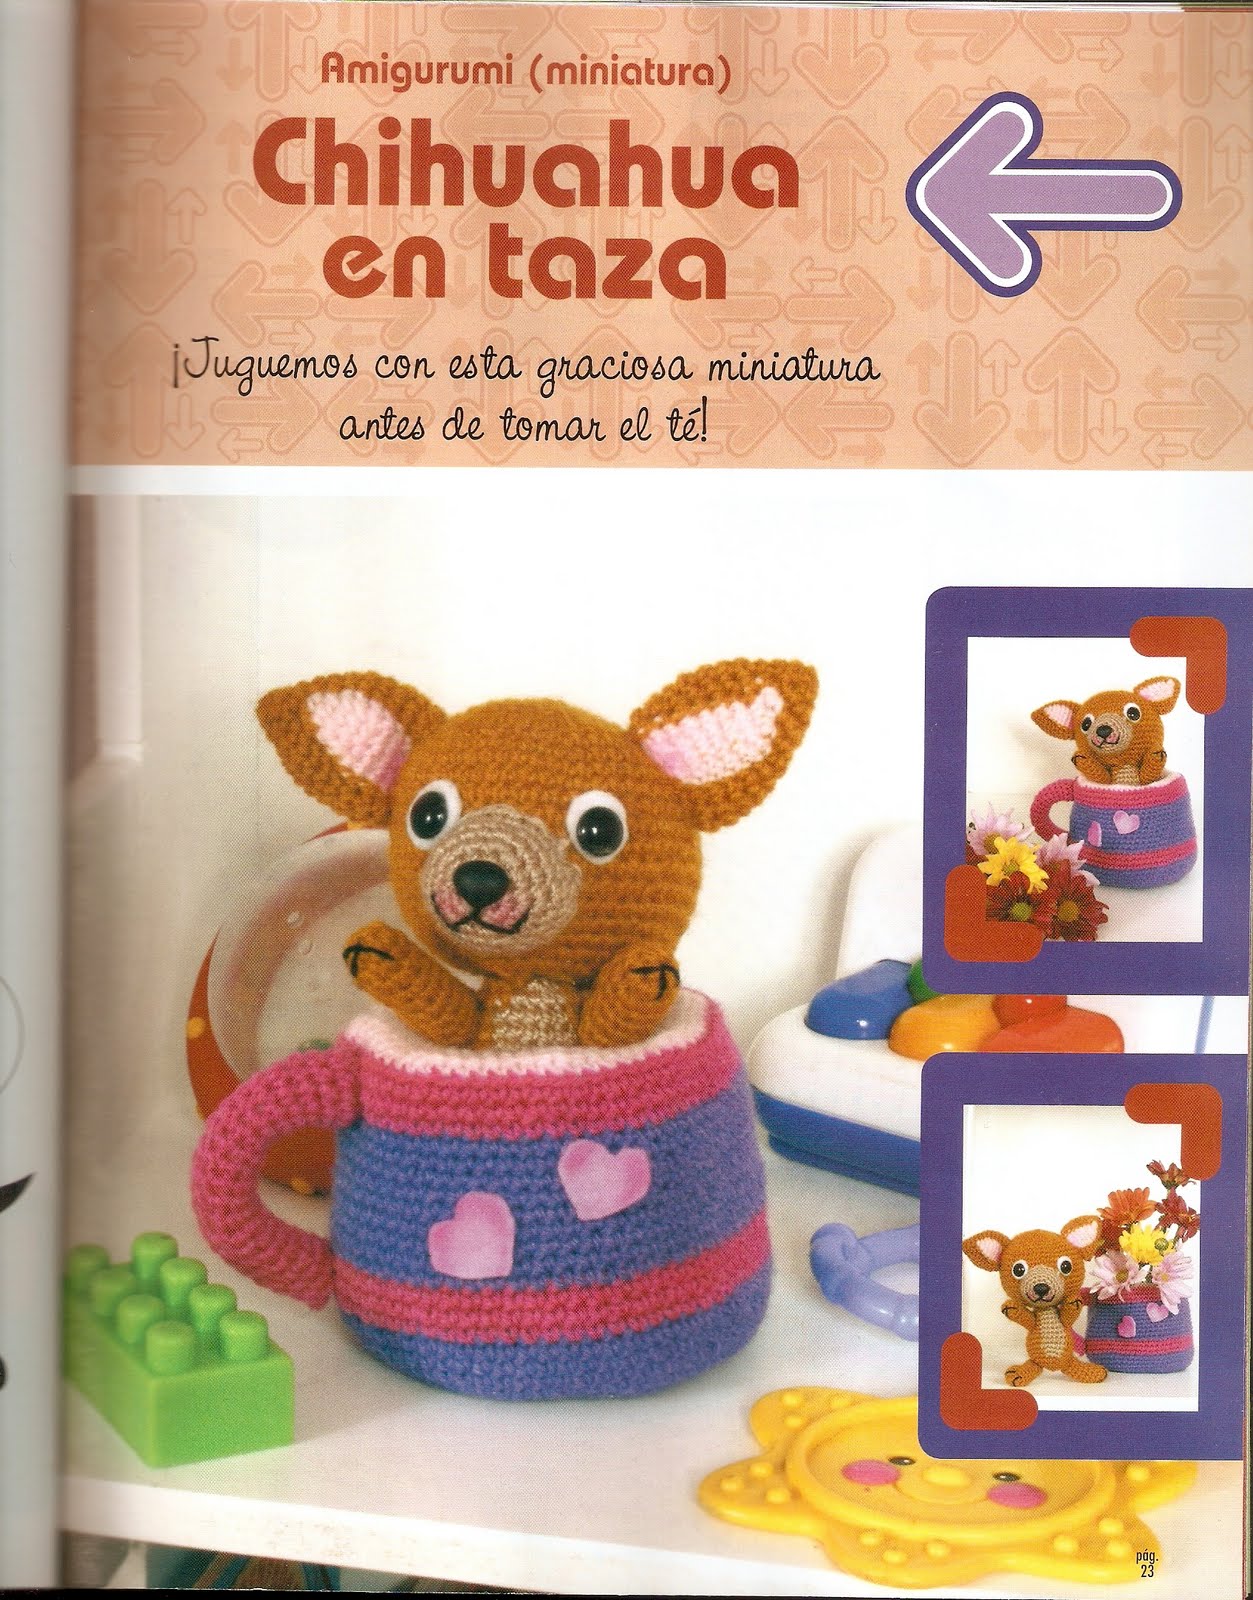 Chihuahua dog in the cup amigurumi pattern 1 (1)